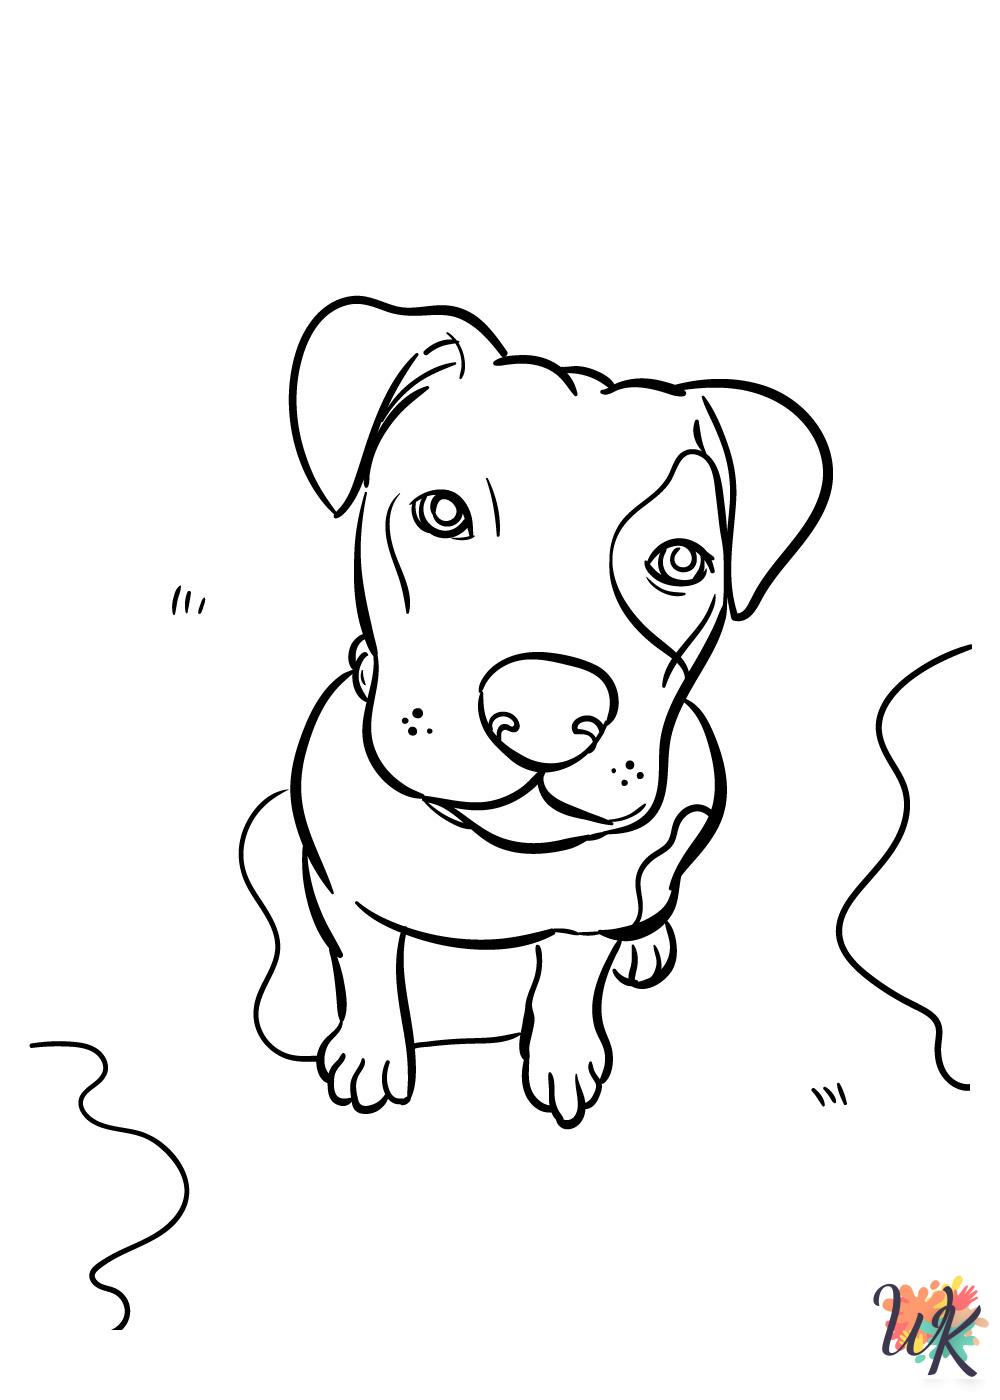 Dogs coloring pages for adults